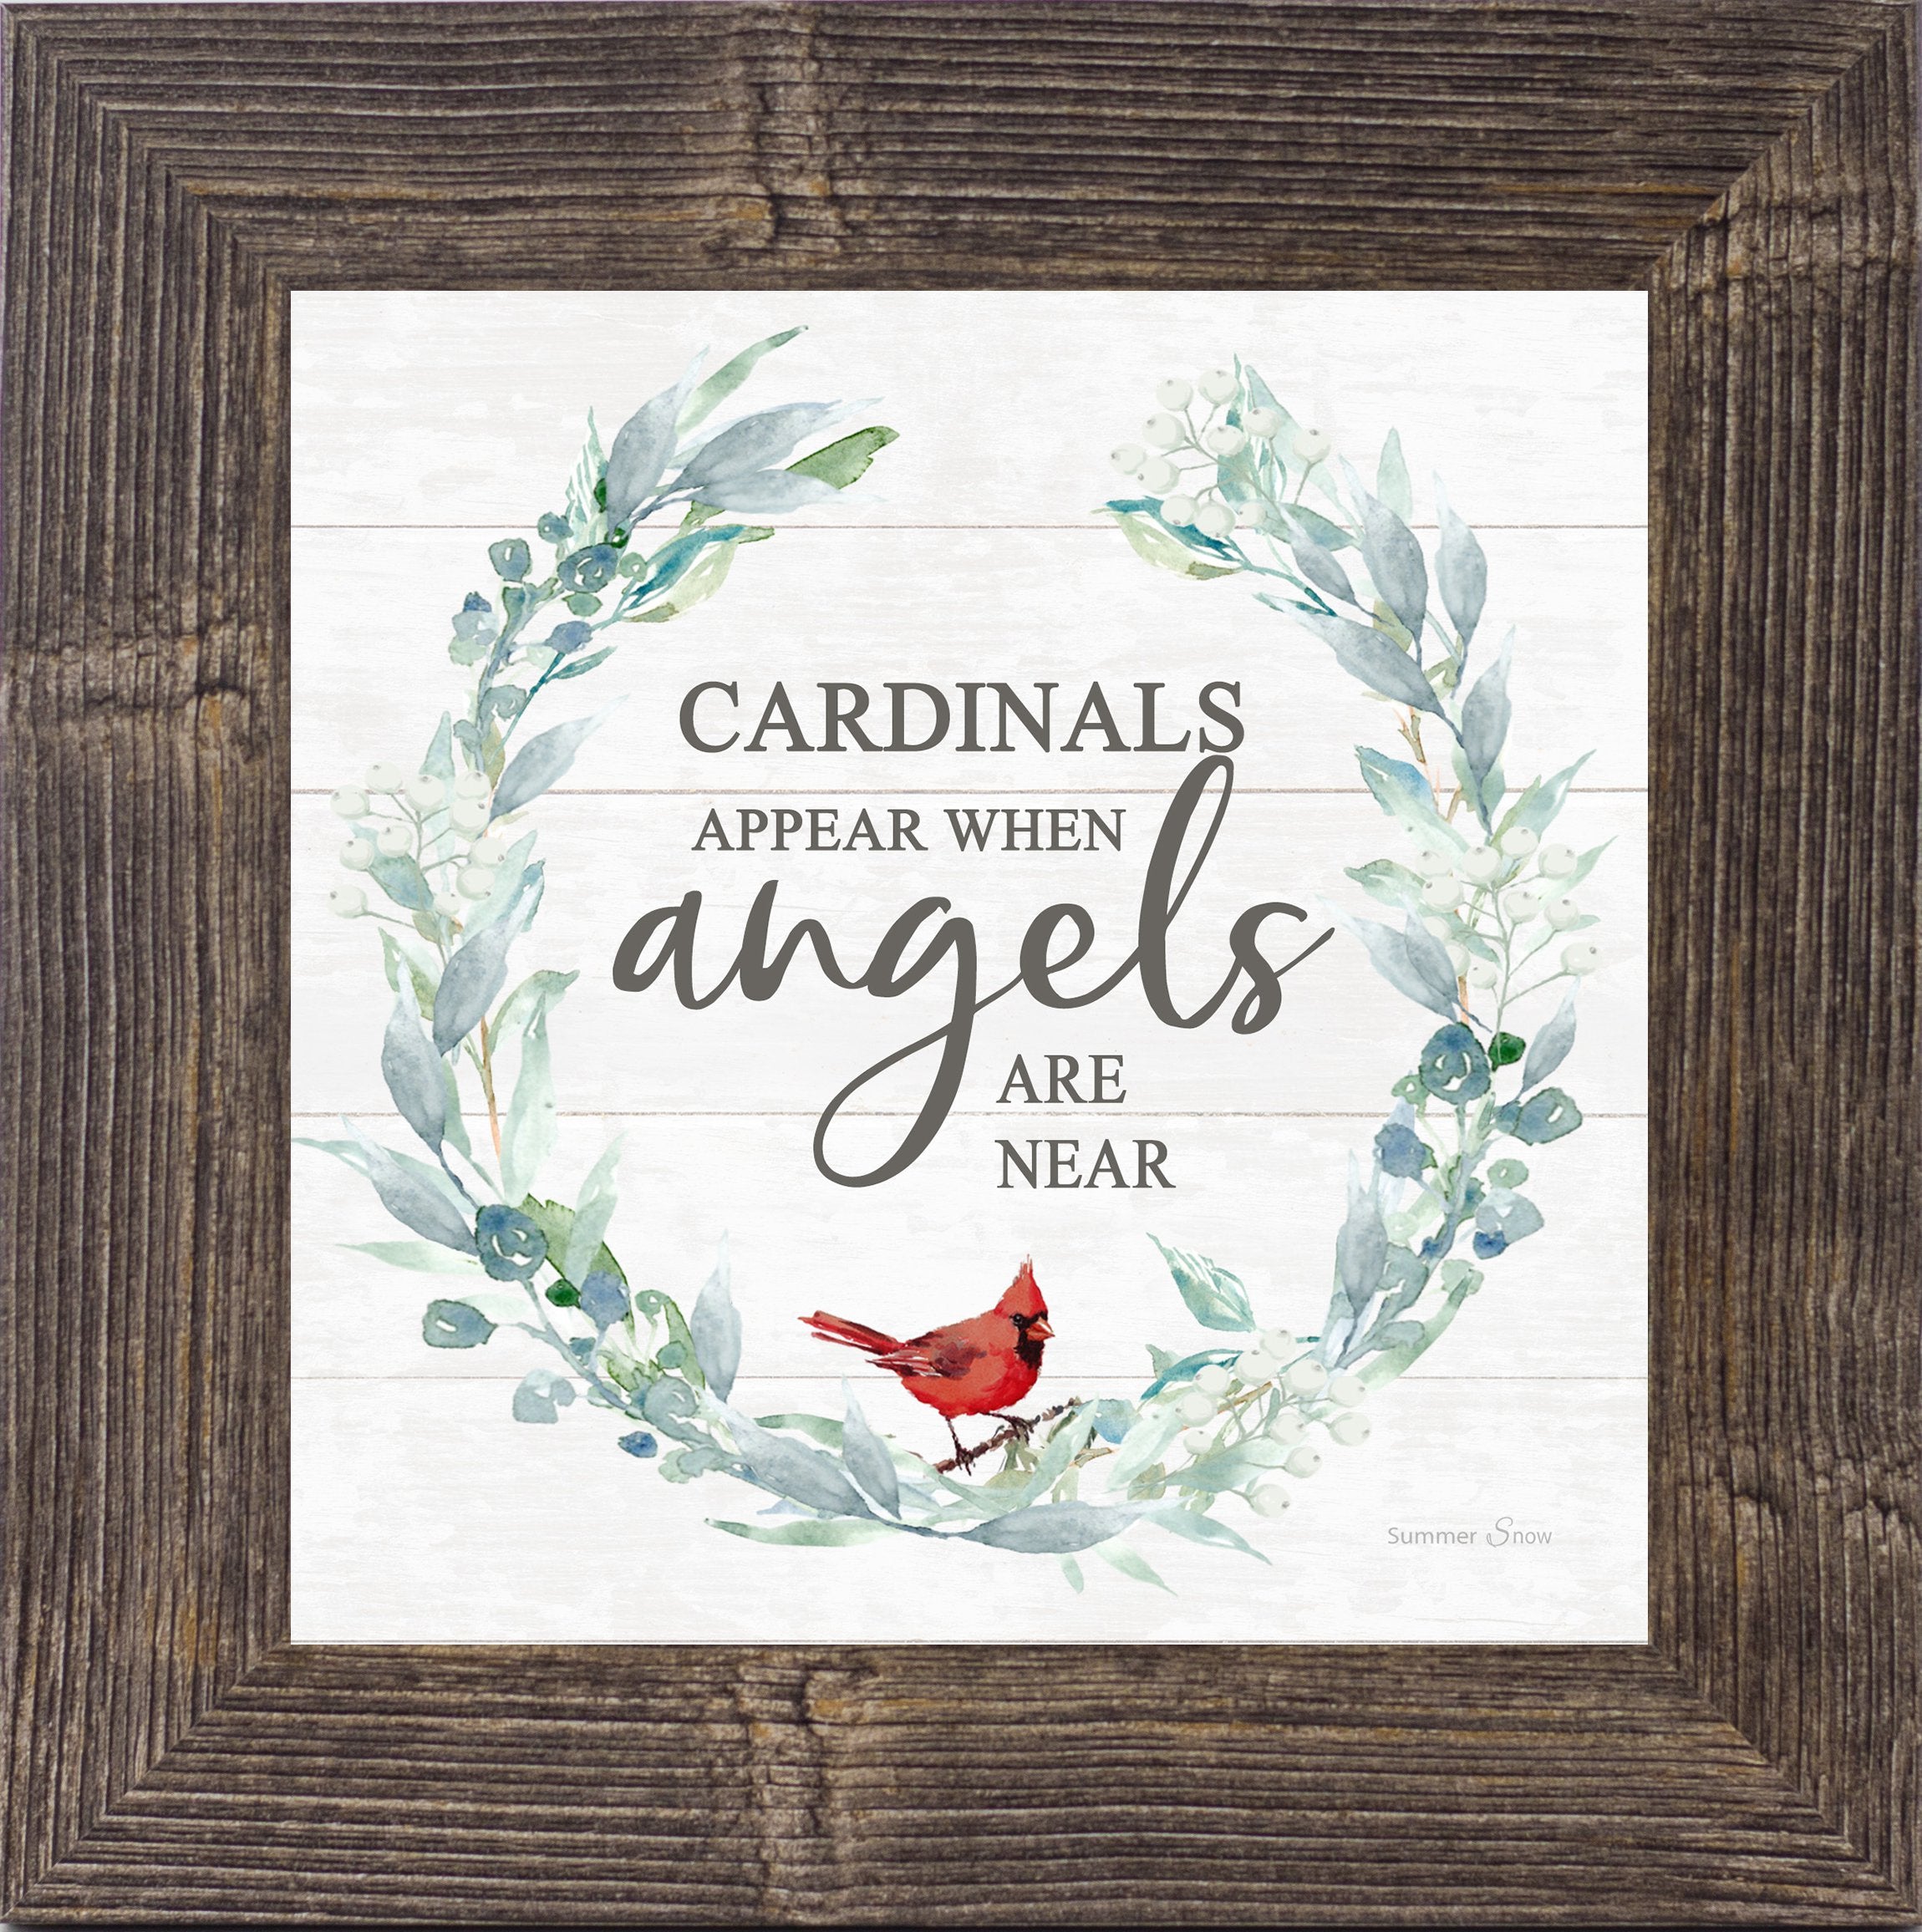 Cardinals Appear When Angels are Near by Summer Snow SS823 - Summer Snow Art